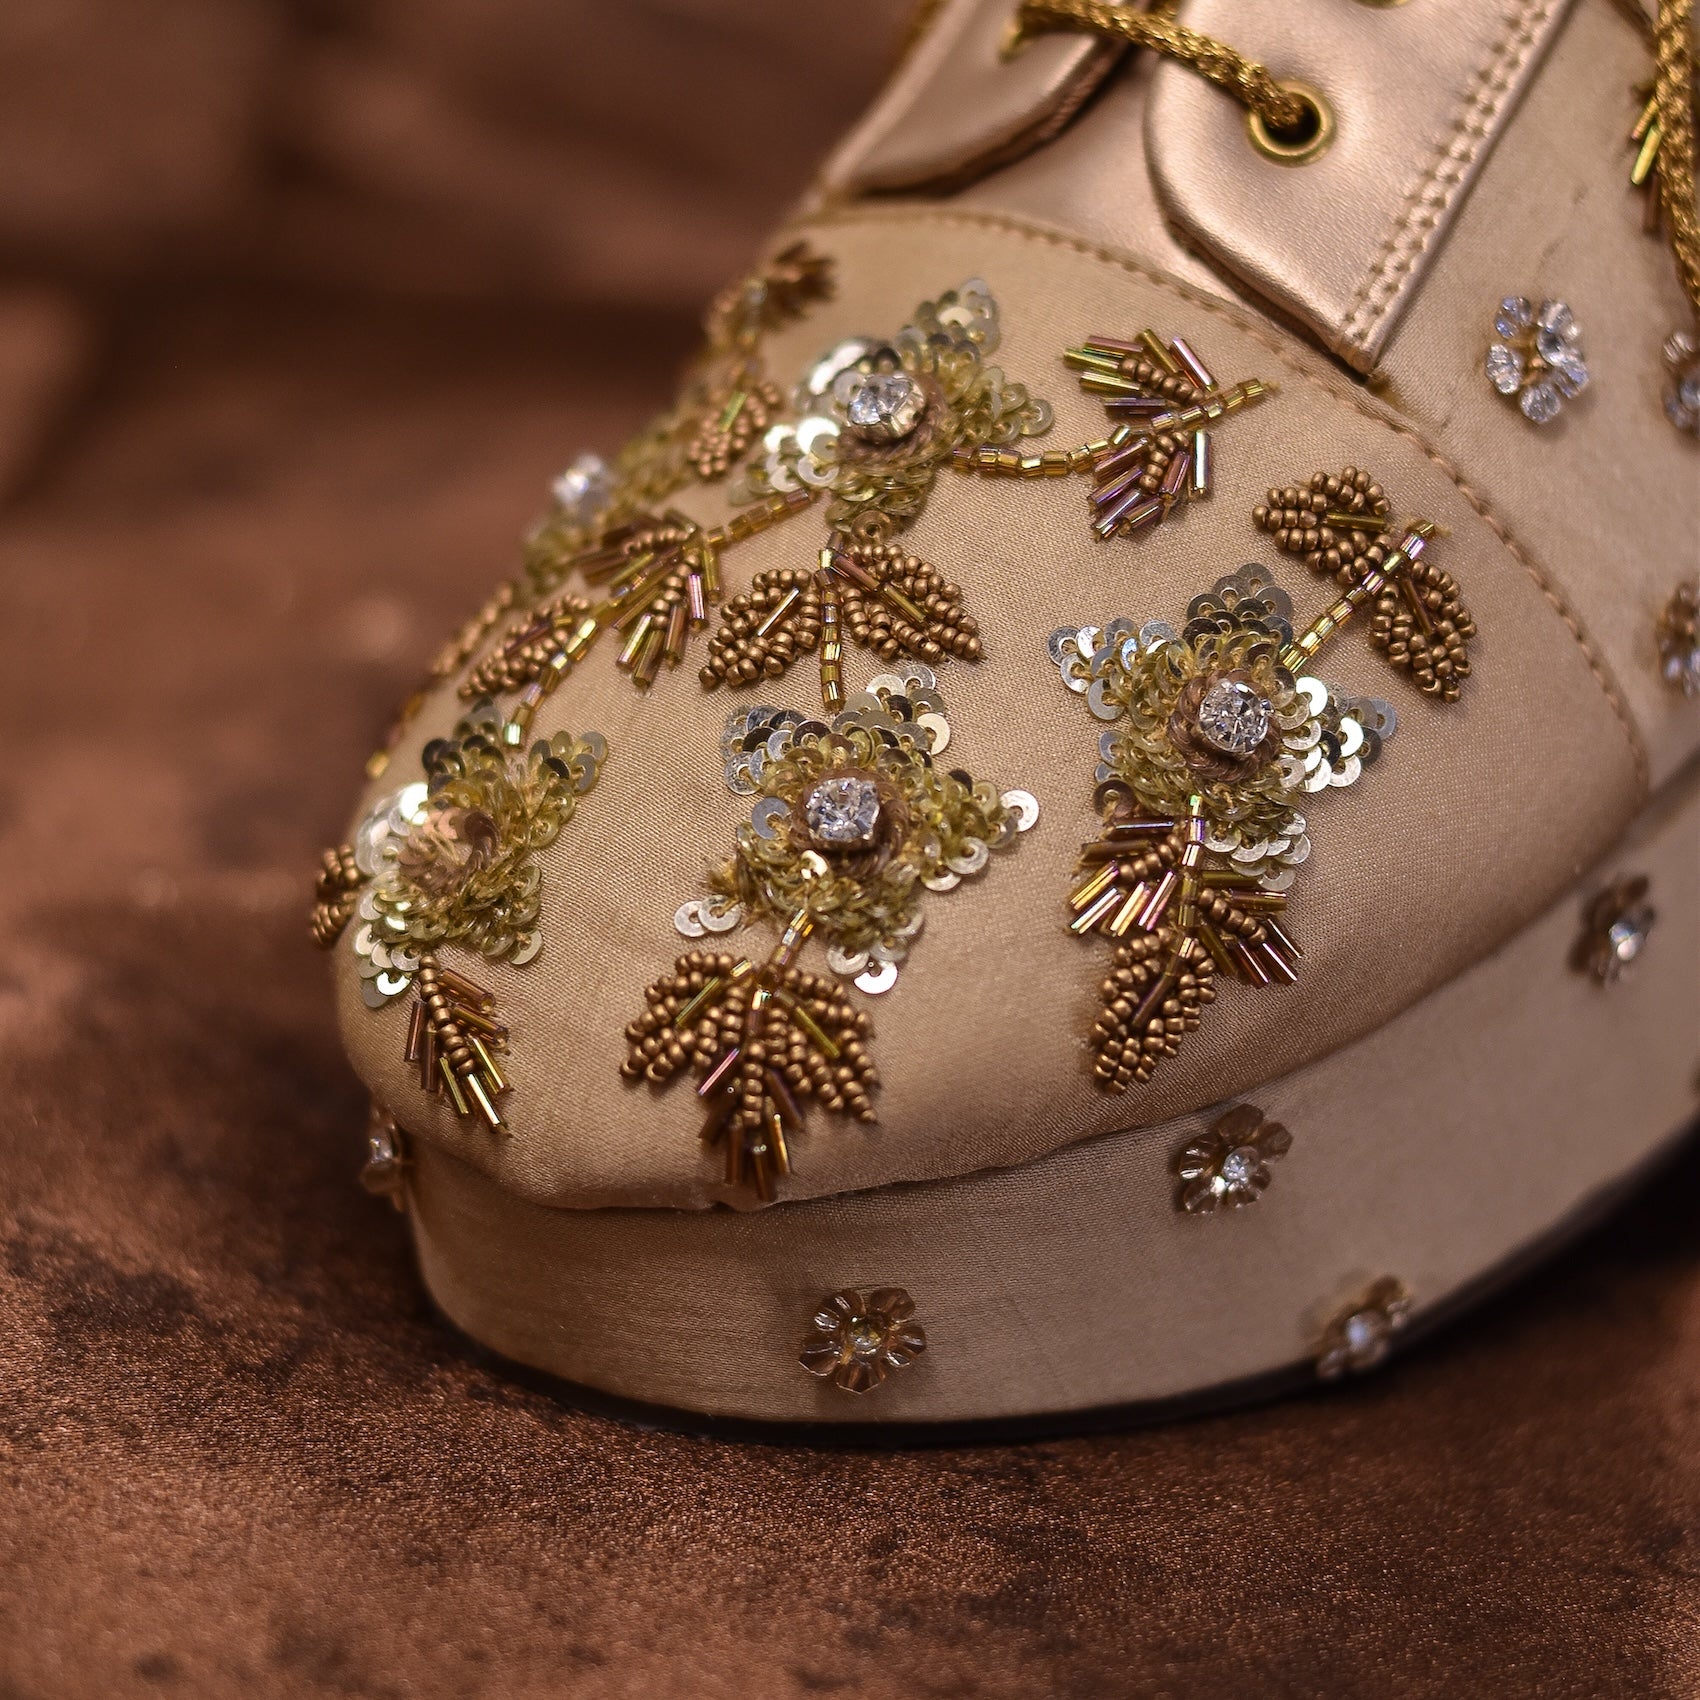 Embellished sneaker wedding shoes with hand embroidery